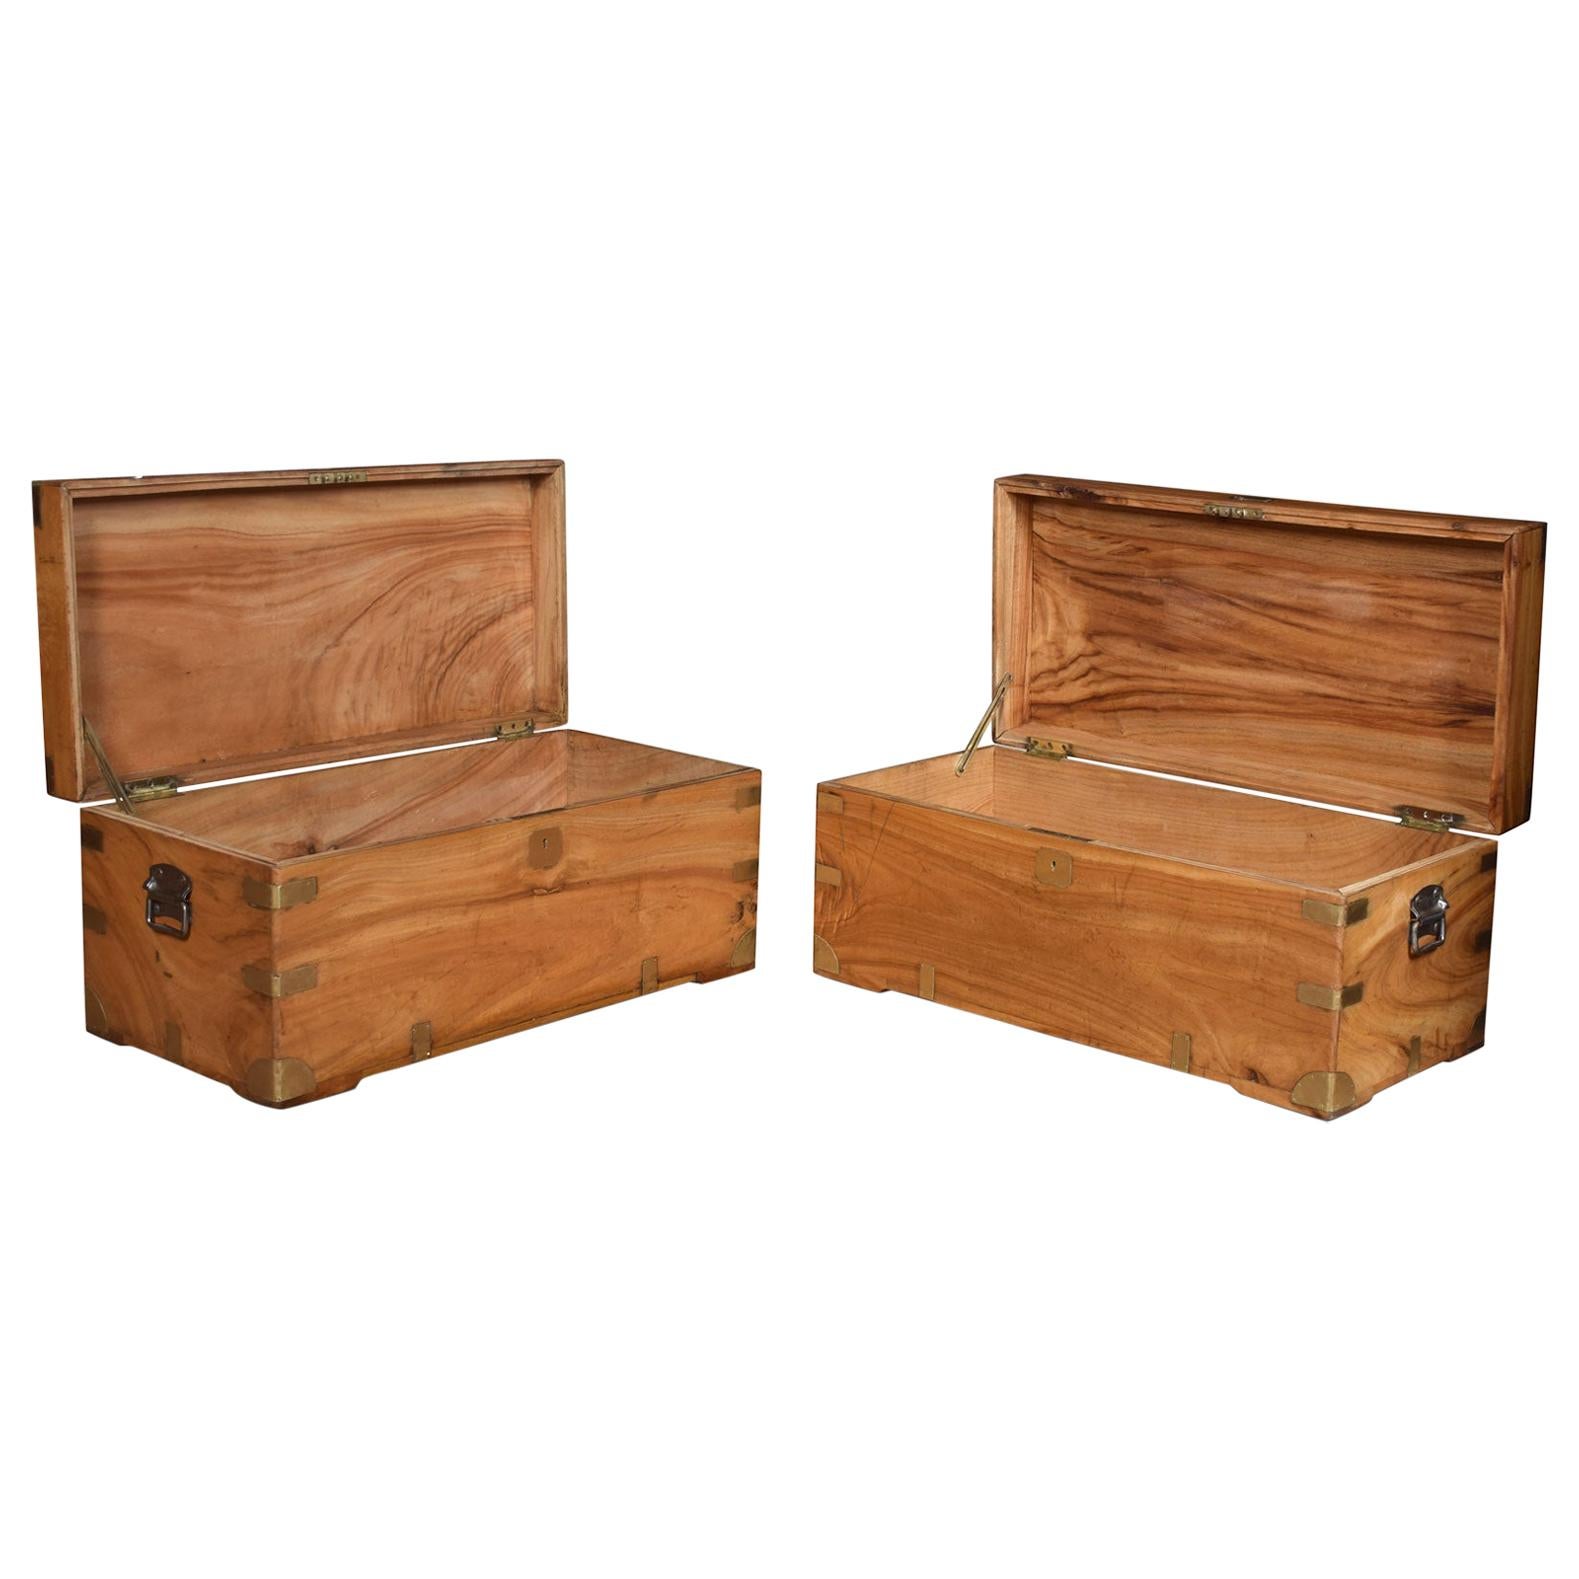 Near Pair of Chinese Export Brass-Bound Camphorwood Chests